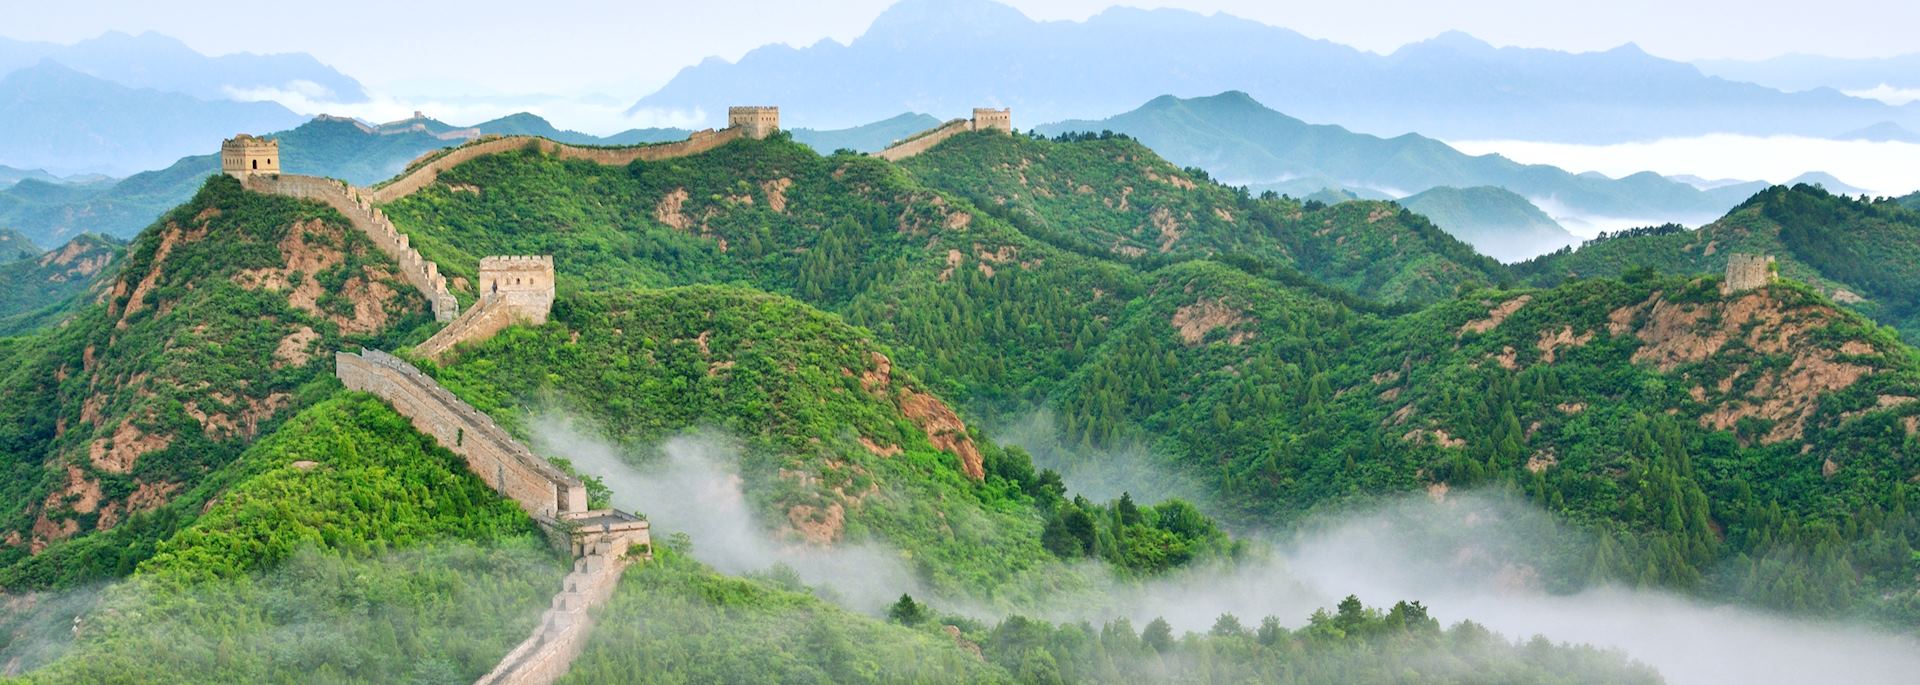 Mist at the Great Wall of China